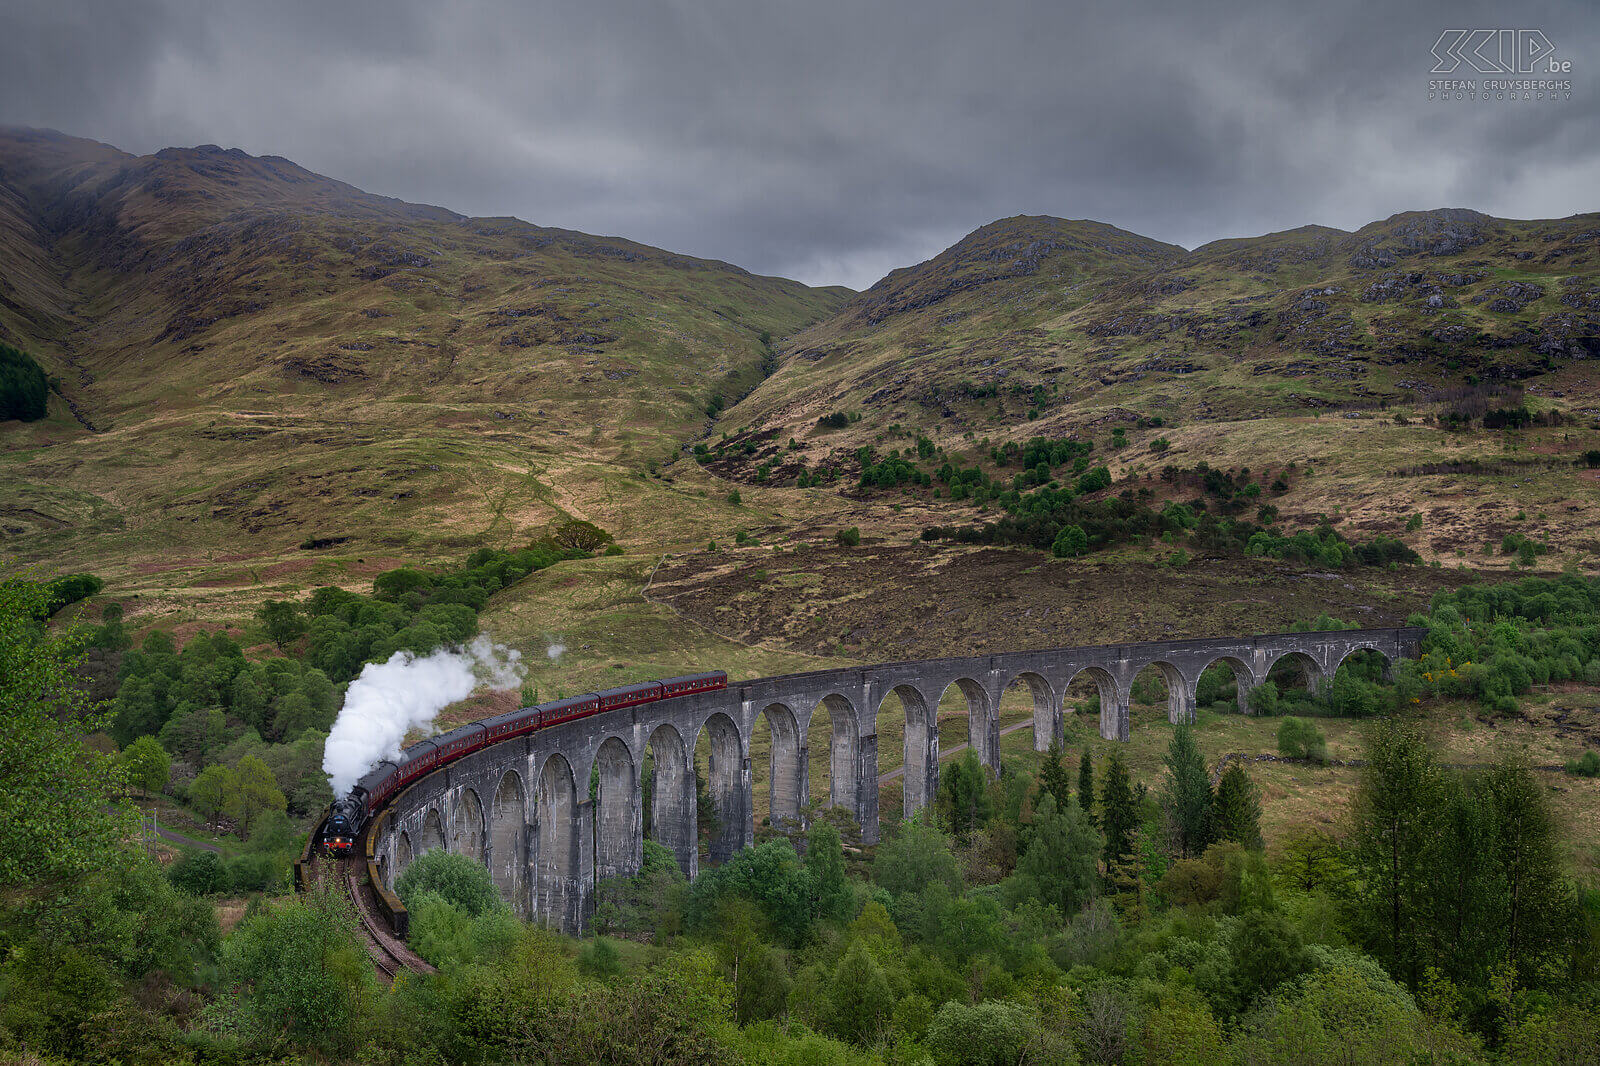 Glenfinnan Viaduct - The Jacobite Next to the Glenfinann Monument there is also the railway viaduct. It was built between July 1897 and October 1898 and is one of the most important structures on the railway. The 380 meter long structure consists of 21 spans, which reach up to 30 meters high. In summer, the tourist train 'The Jacobite' with steam locomotives runs daily between Fort William and Mallaig. Many film scenes were filmed on the Glenfinnan Viaduct, including several Harry Potter films in which the Hogwarts Express plays an important role. Stefan Cruysberghs